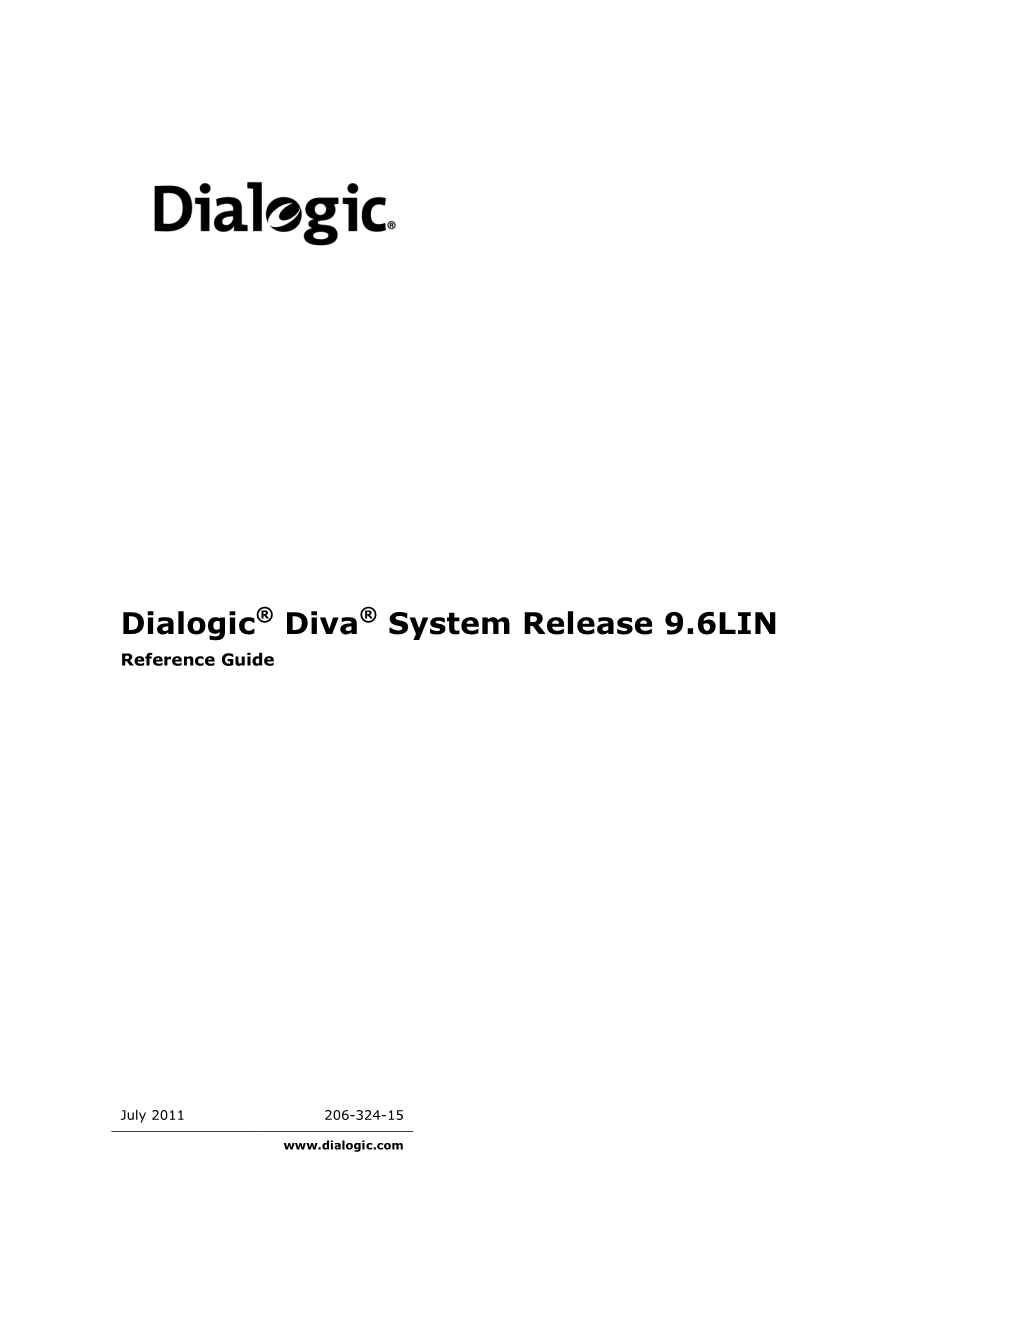 Dialogic Diva System Release 9.6LIN Reference Guide